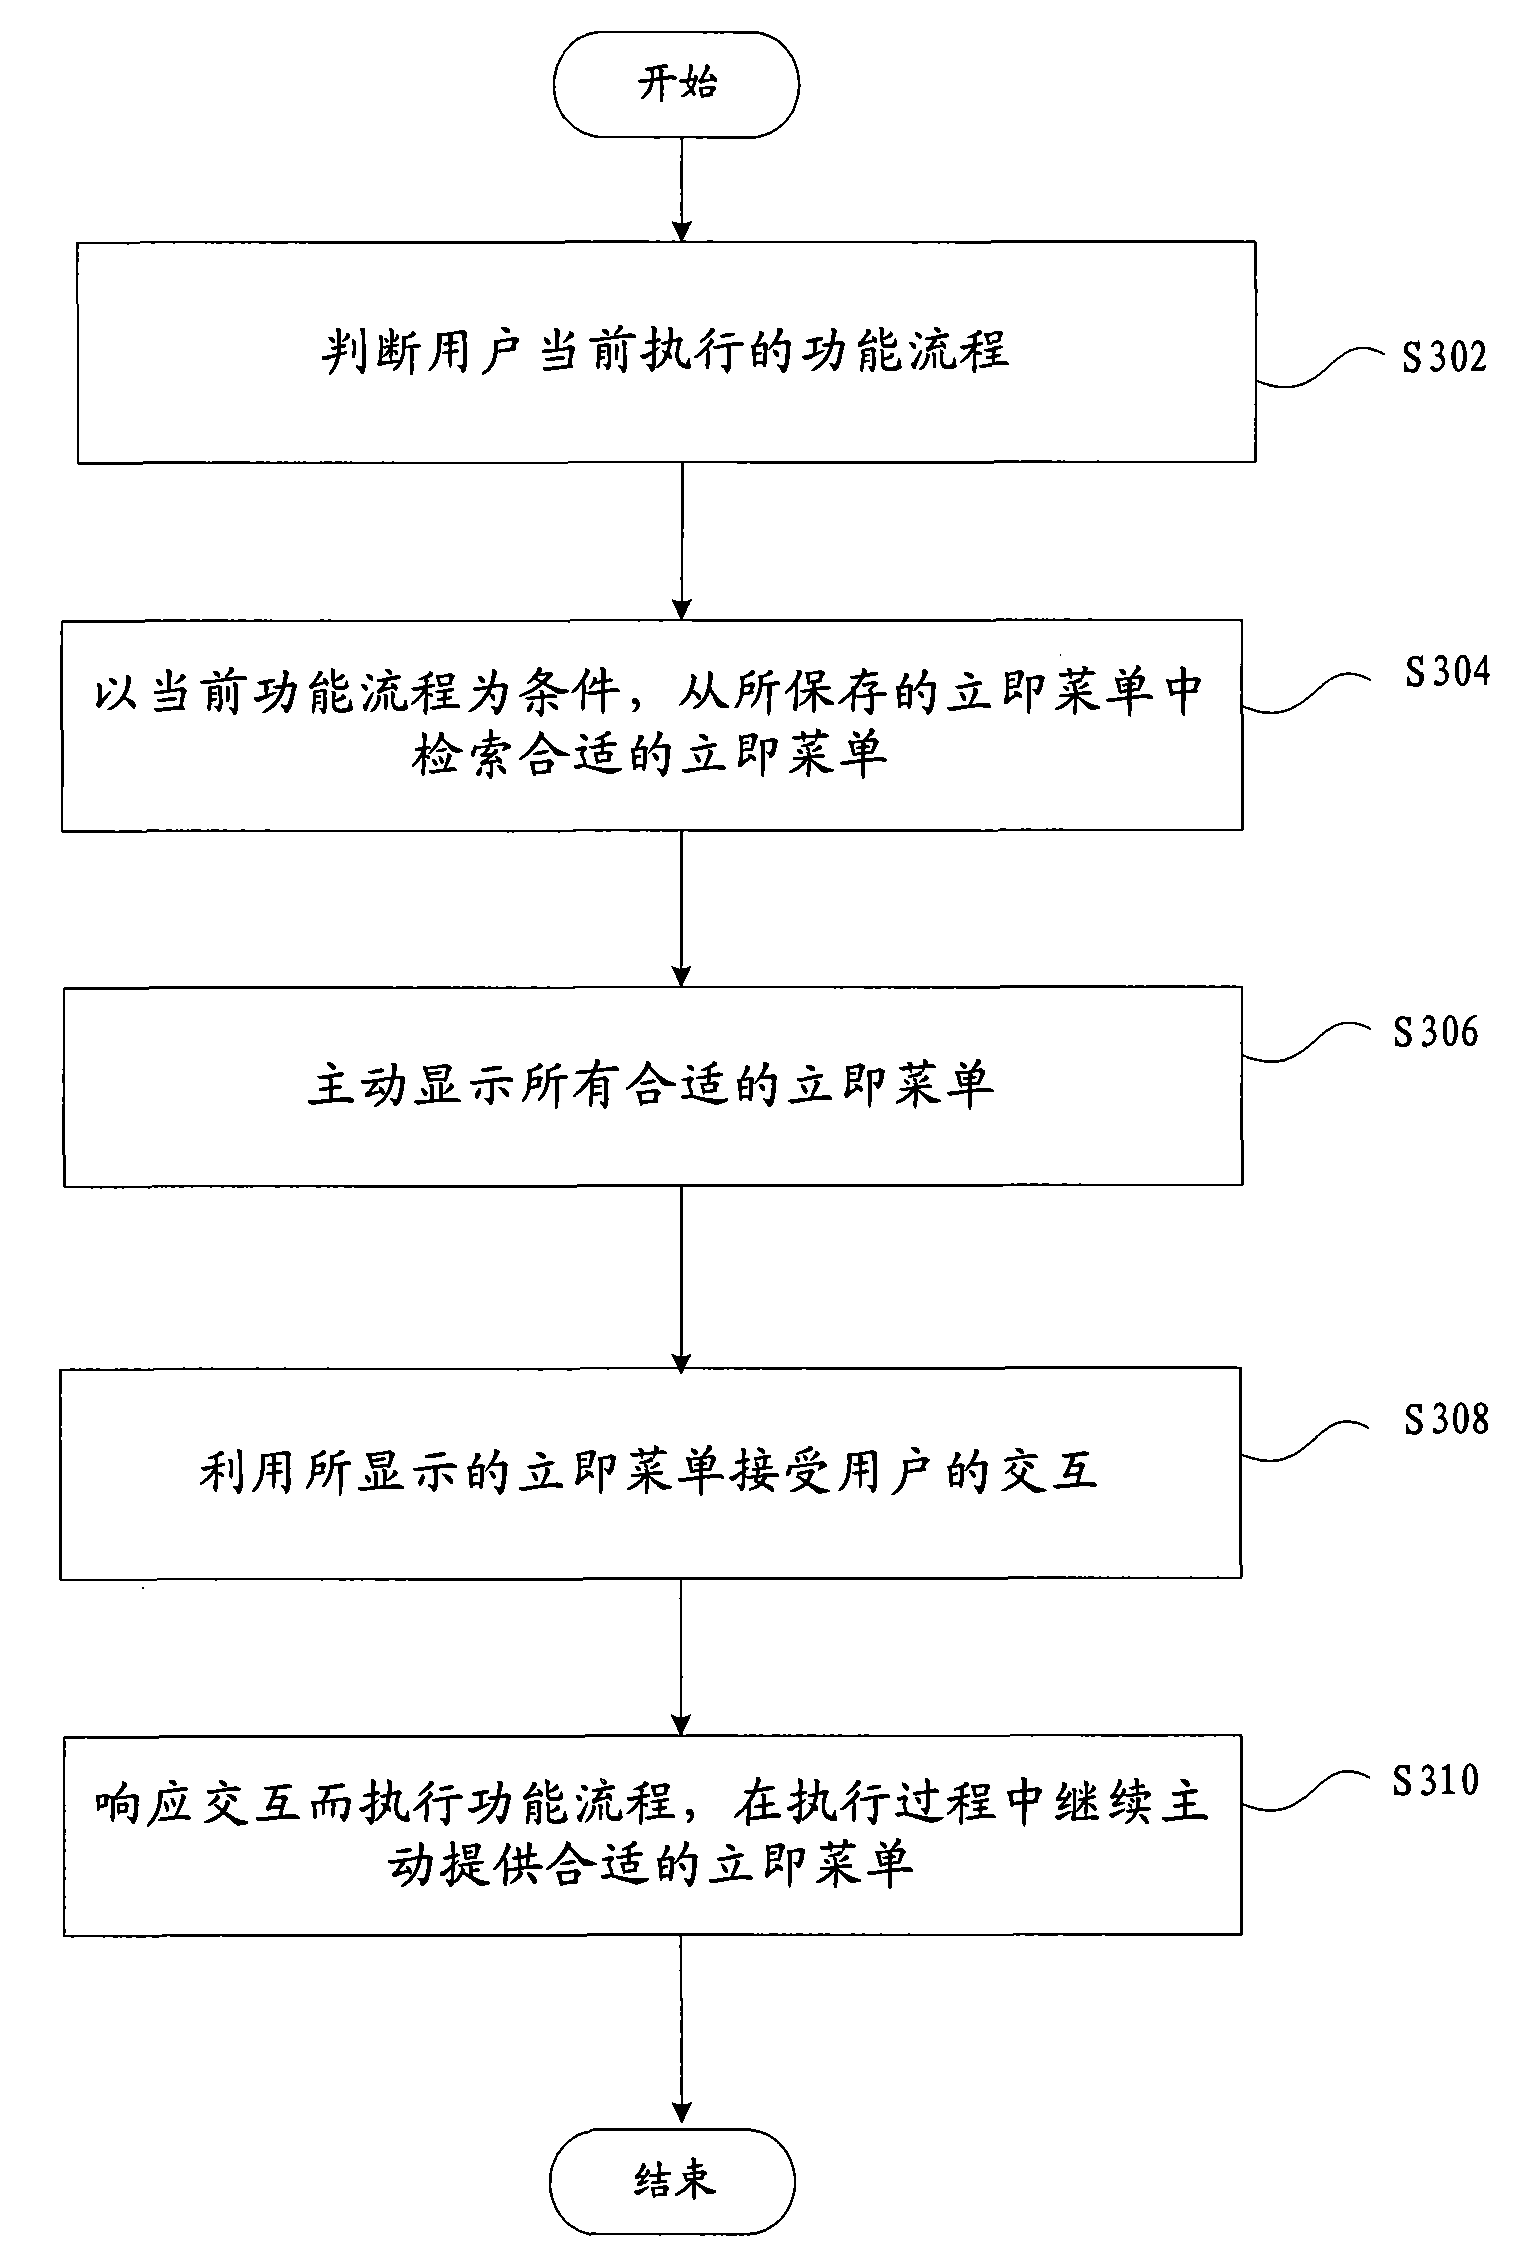 Human-computer interaction method for computer auxiliary design and fabrication